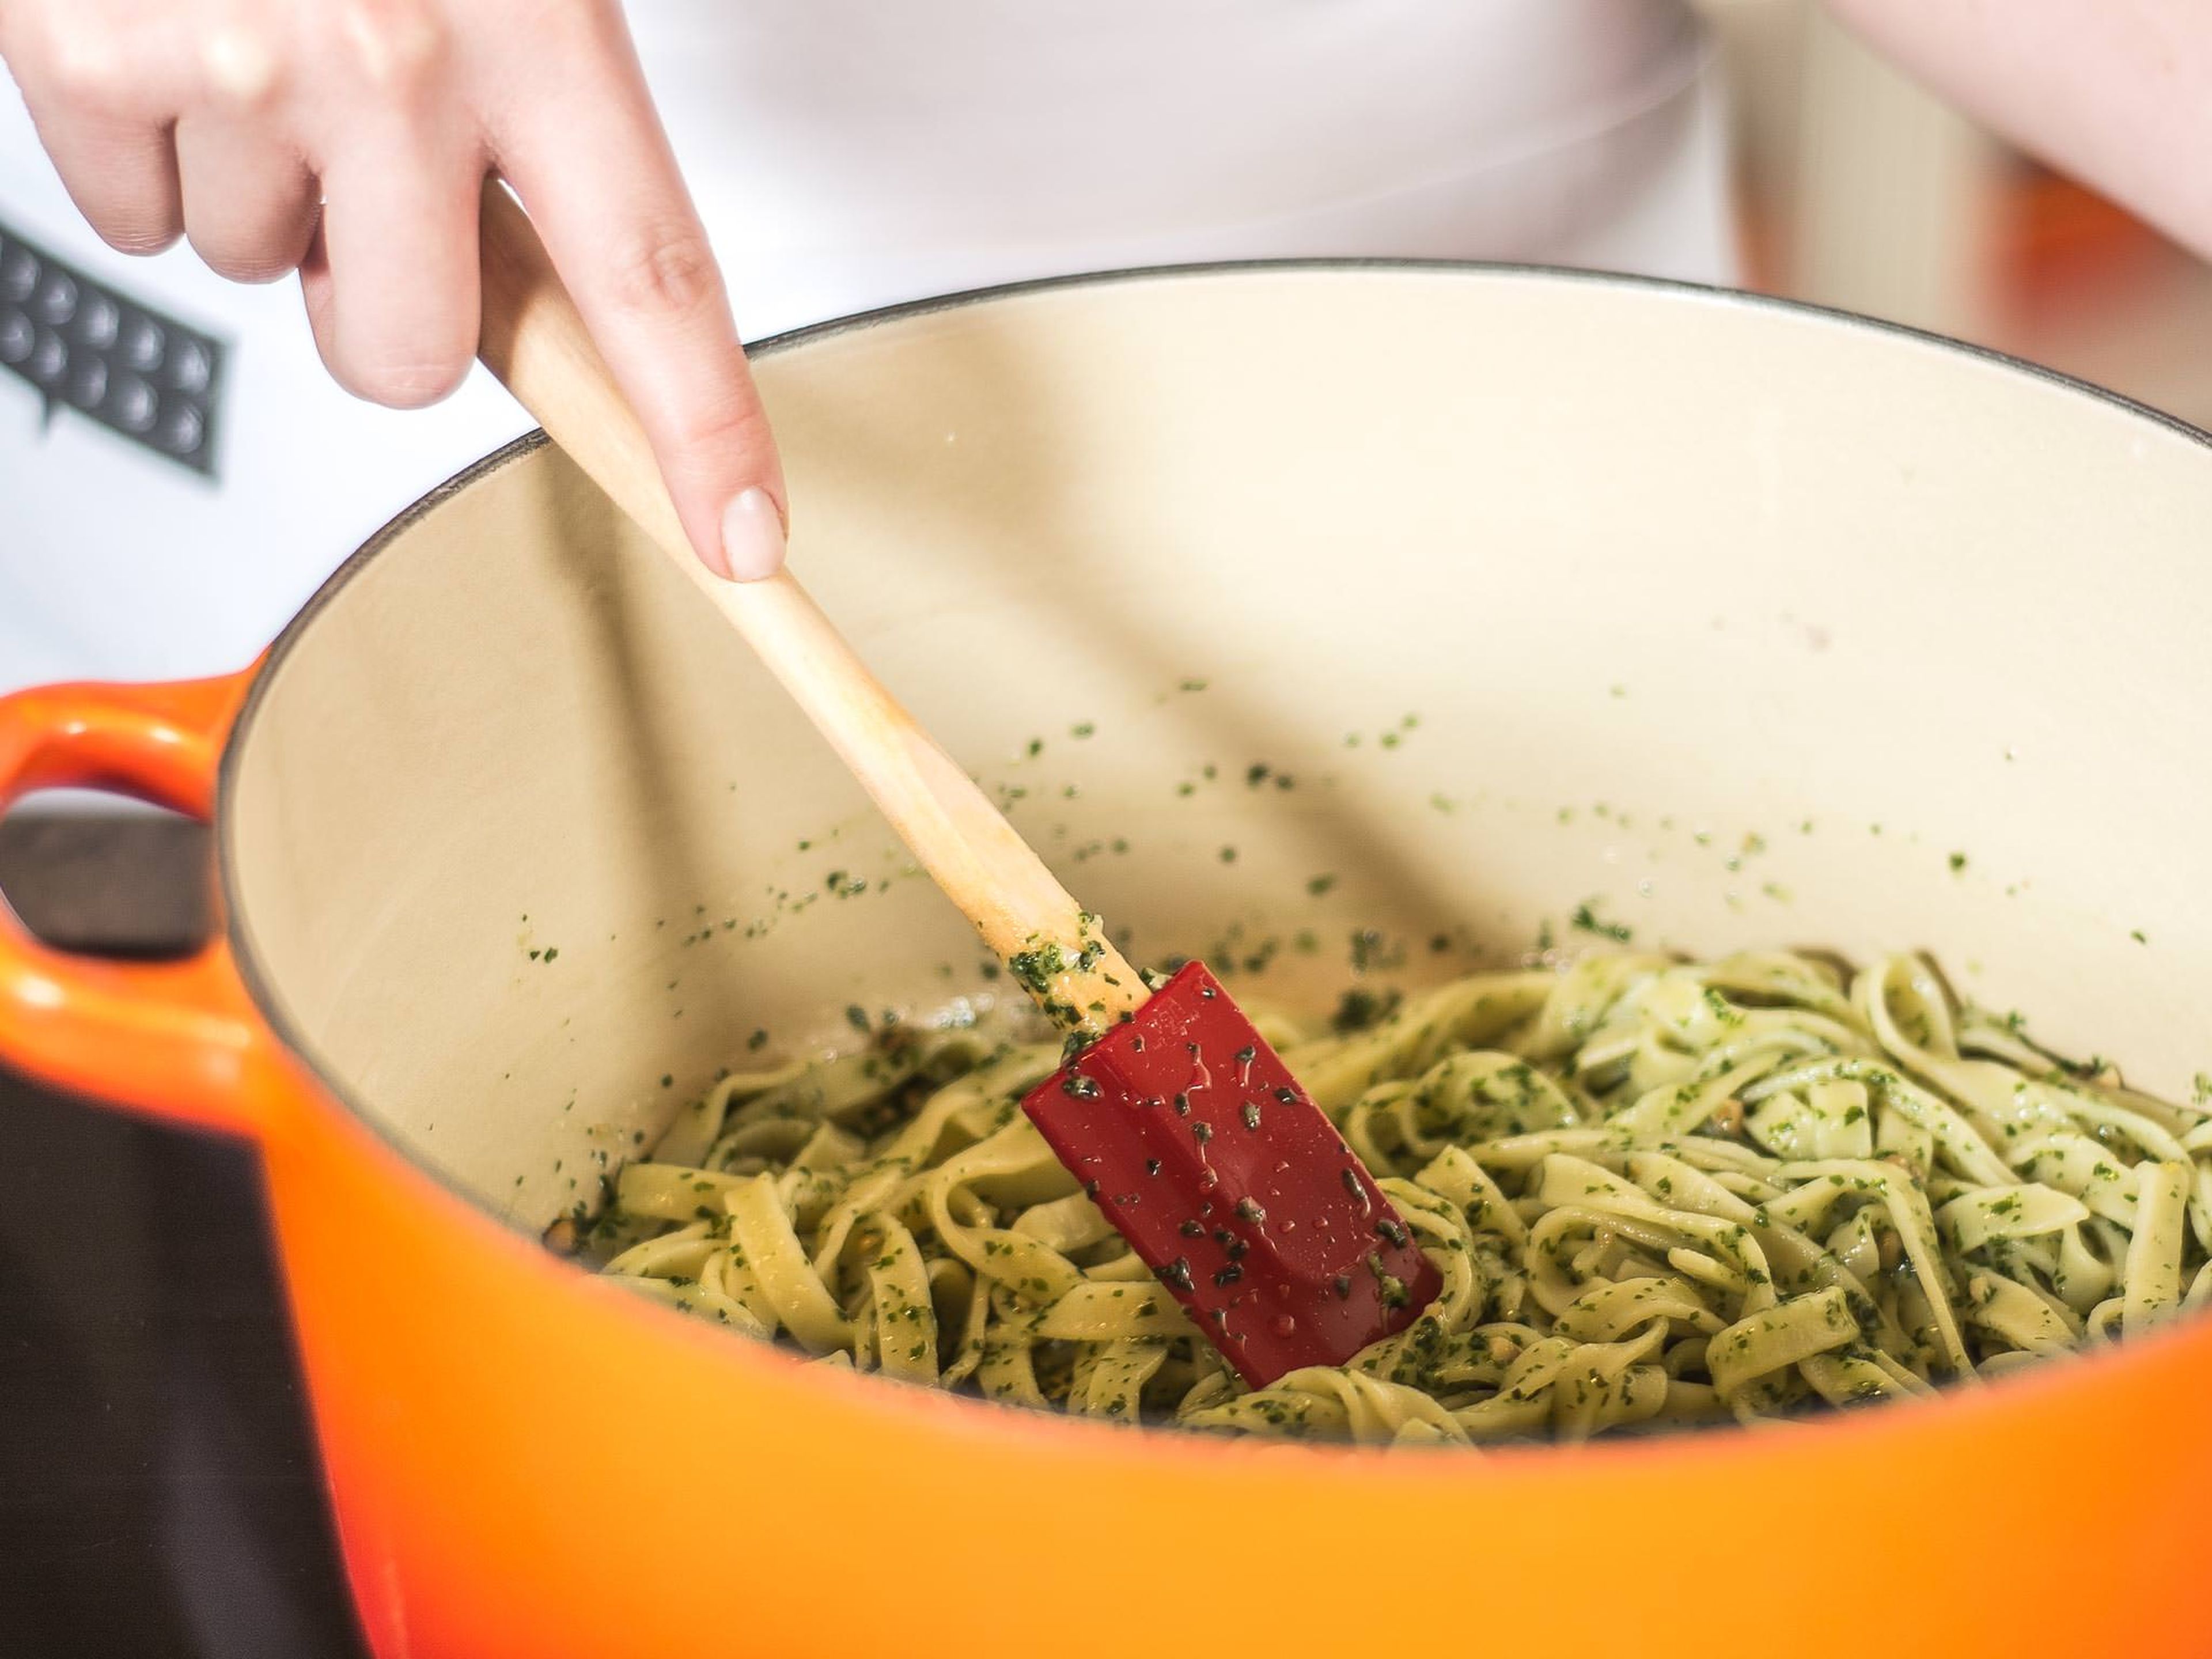 Toss the tagliatelle in with the pesto. For this you can use the same pot as the tagliatelle was cooked in. Arrange the strips of bresaola on top of the pasta to serve.